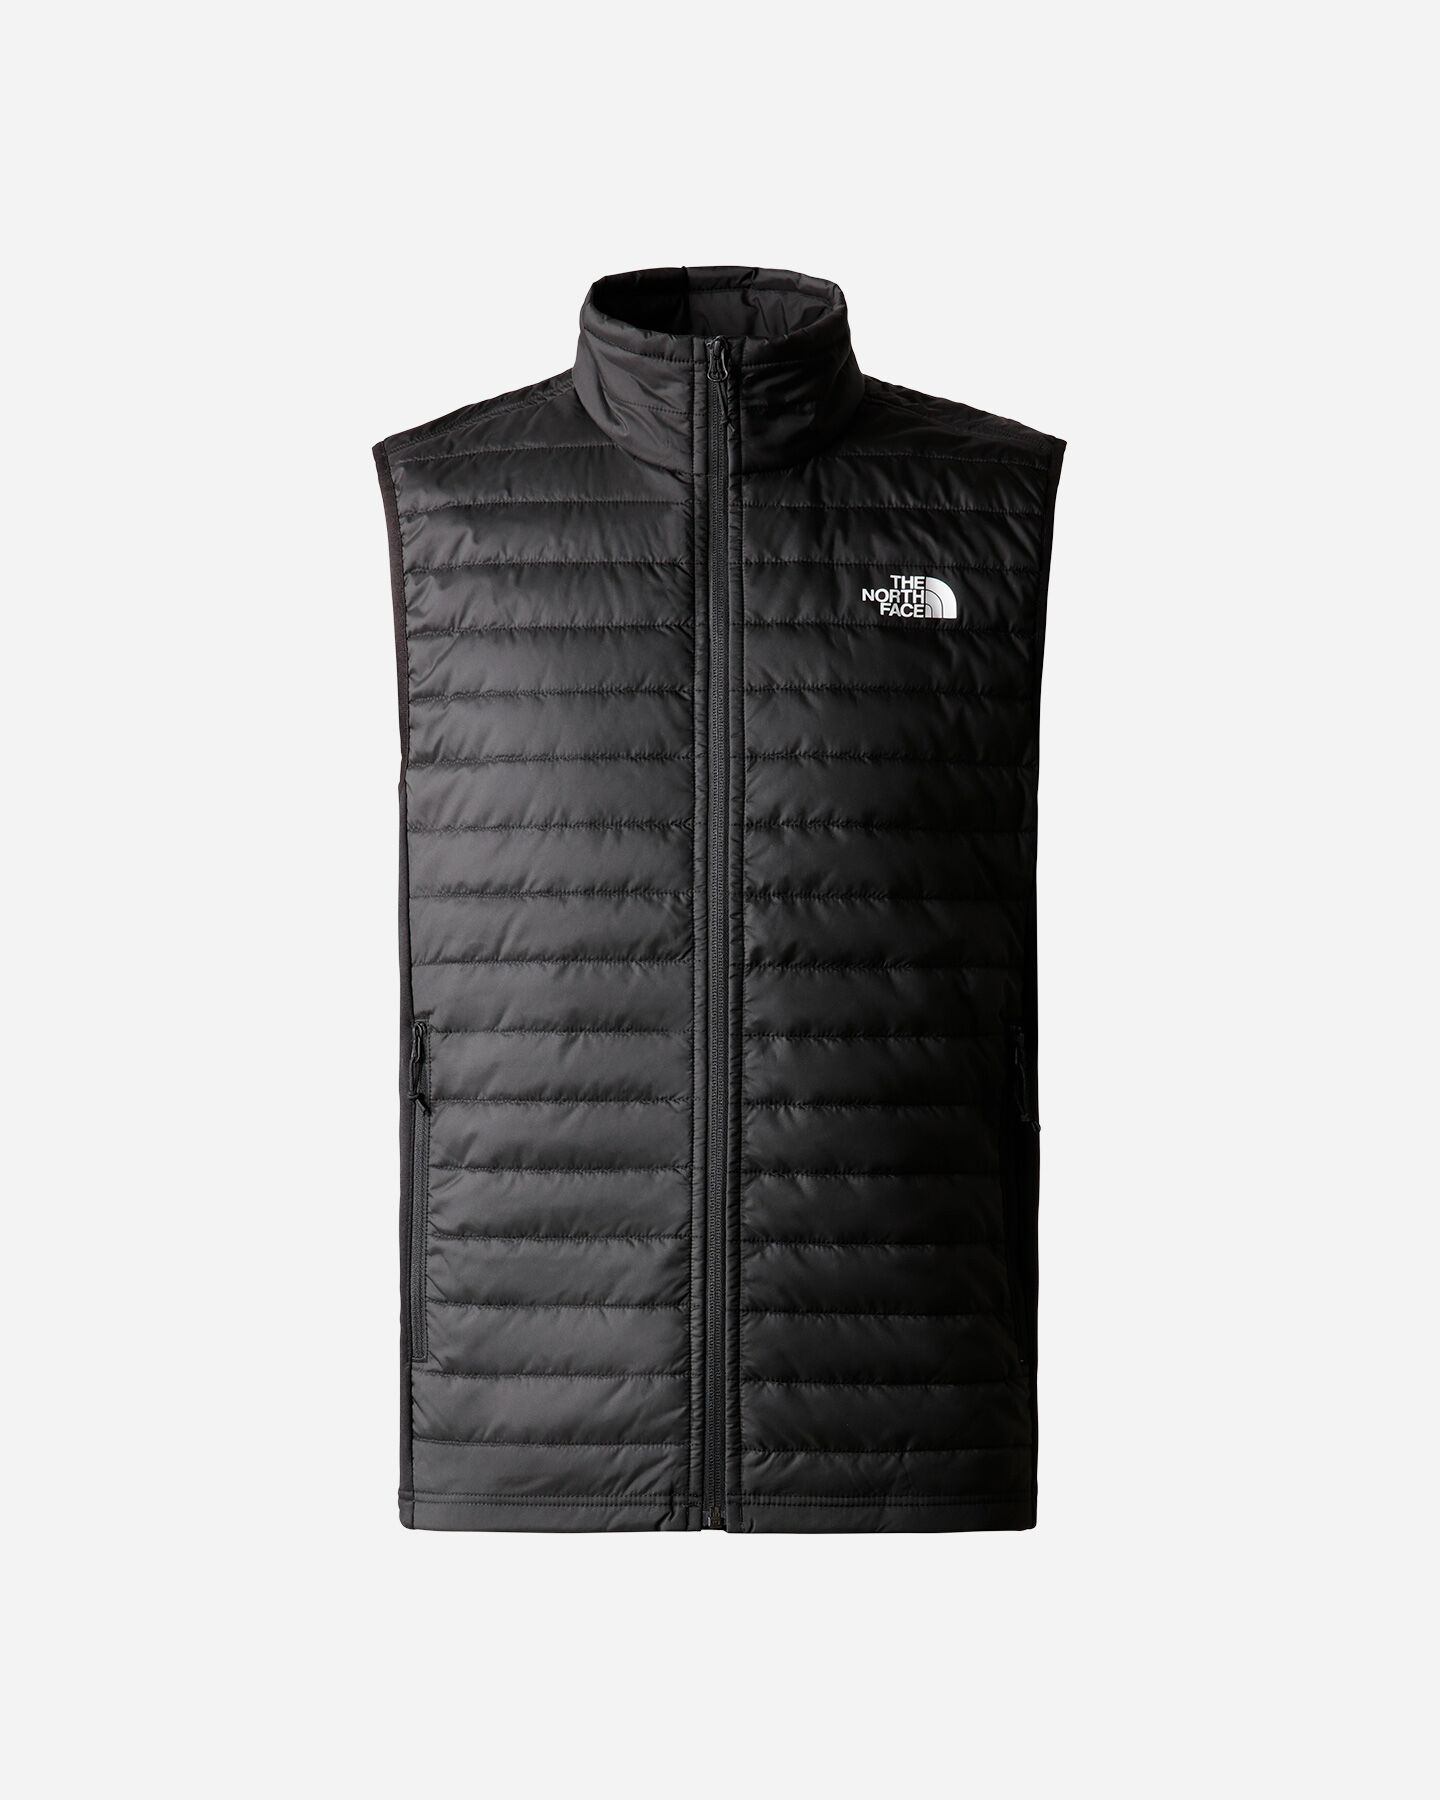  Gilet THE NORTH FACE CANYONLANDS HYBRID M S5475286|JK3|XS scatto 0